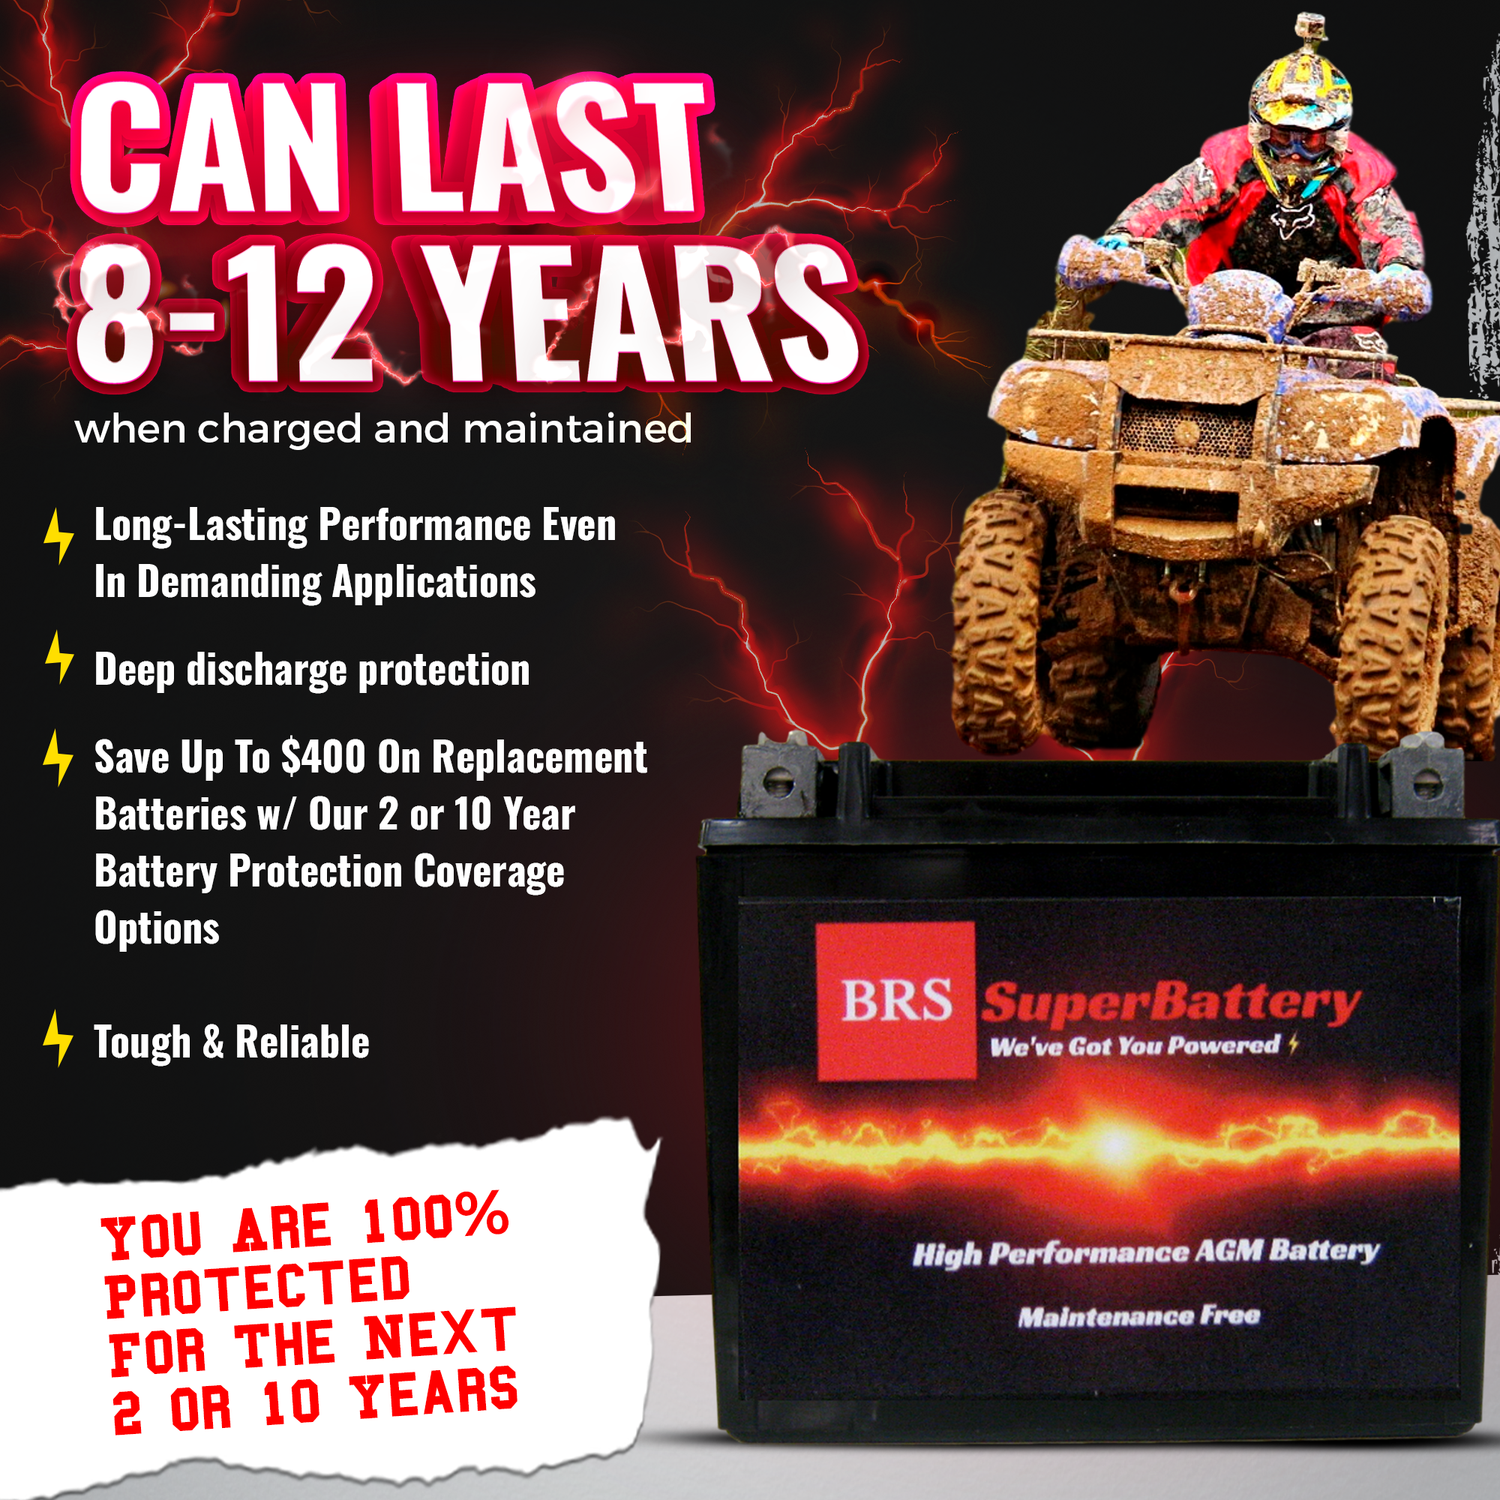 High Performance BRS20HL-BS 10 Year Battery & Smart Charger / Maintainer Combo Bundle Kit 12v Sealed AGM PowerSports Battery - BRS Super Battery